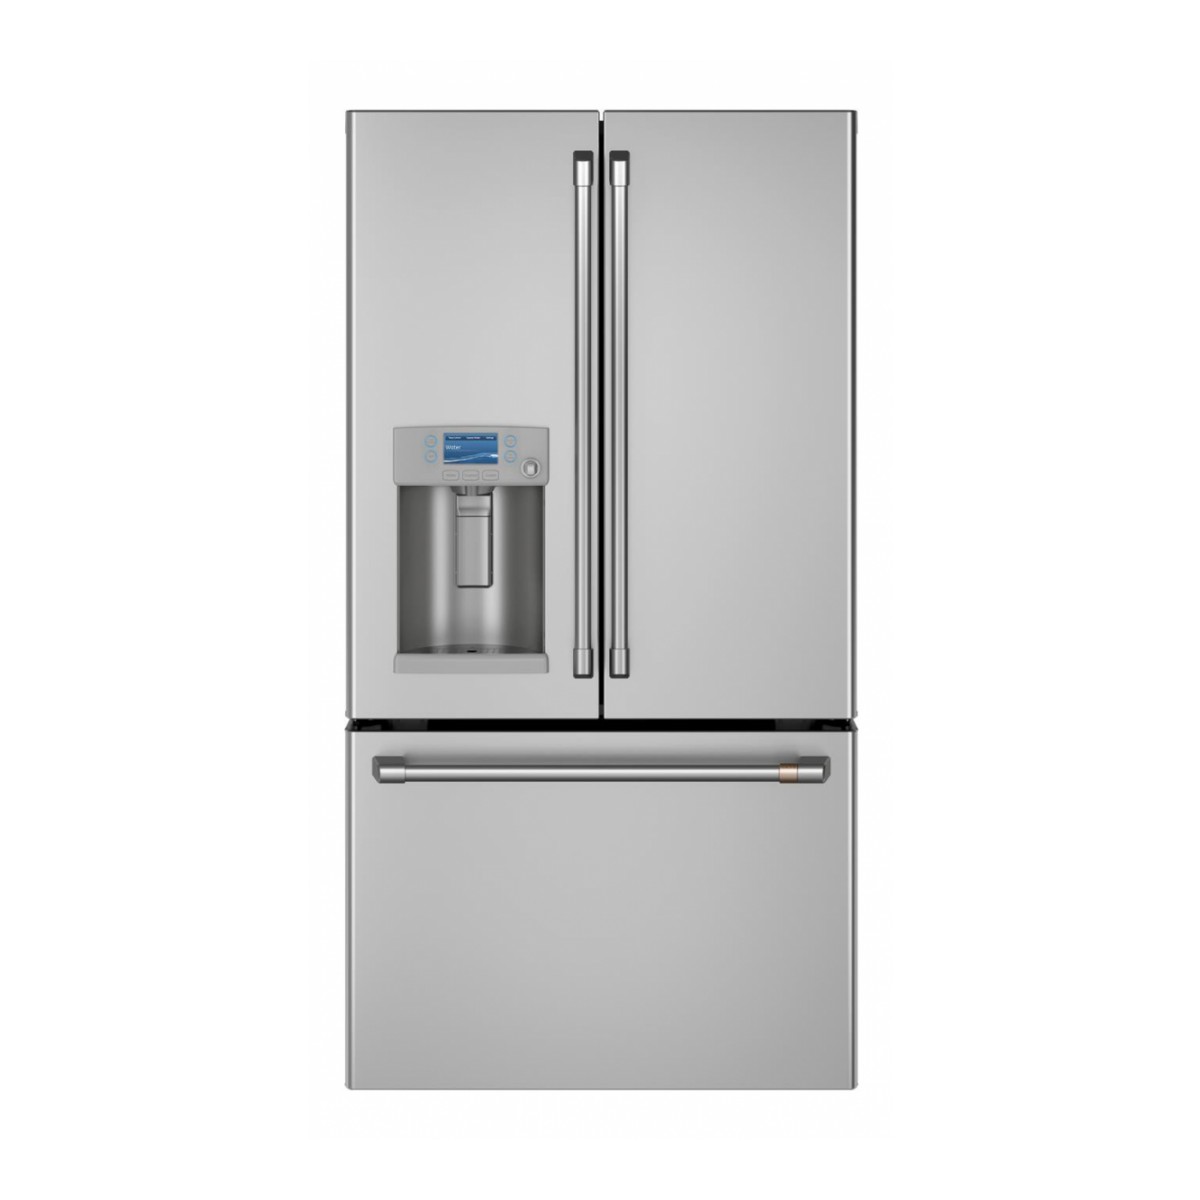 Café™ ENERGY STAR® 22.2 Cu. Ft. Counter-Depth French-Door Refrigerator with Hot Water Dispenser